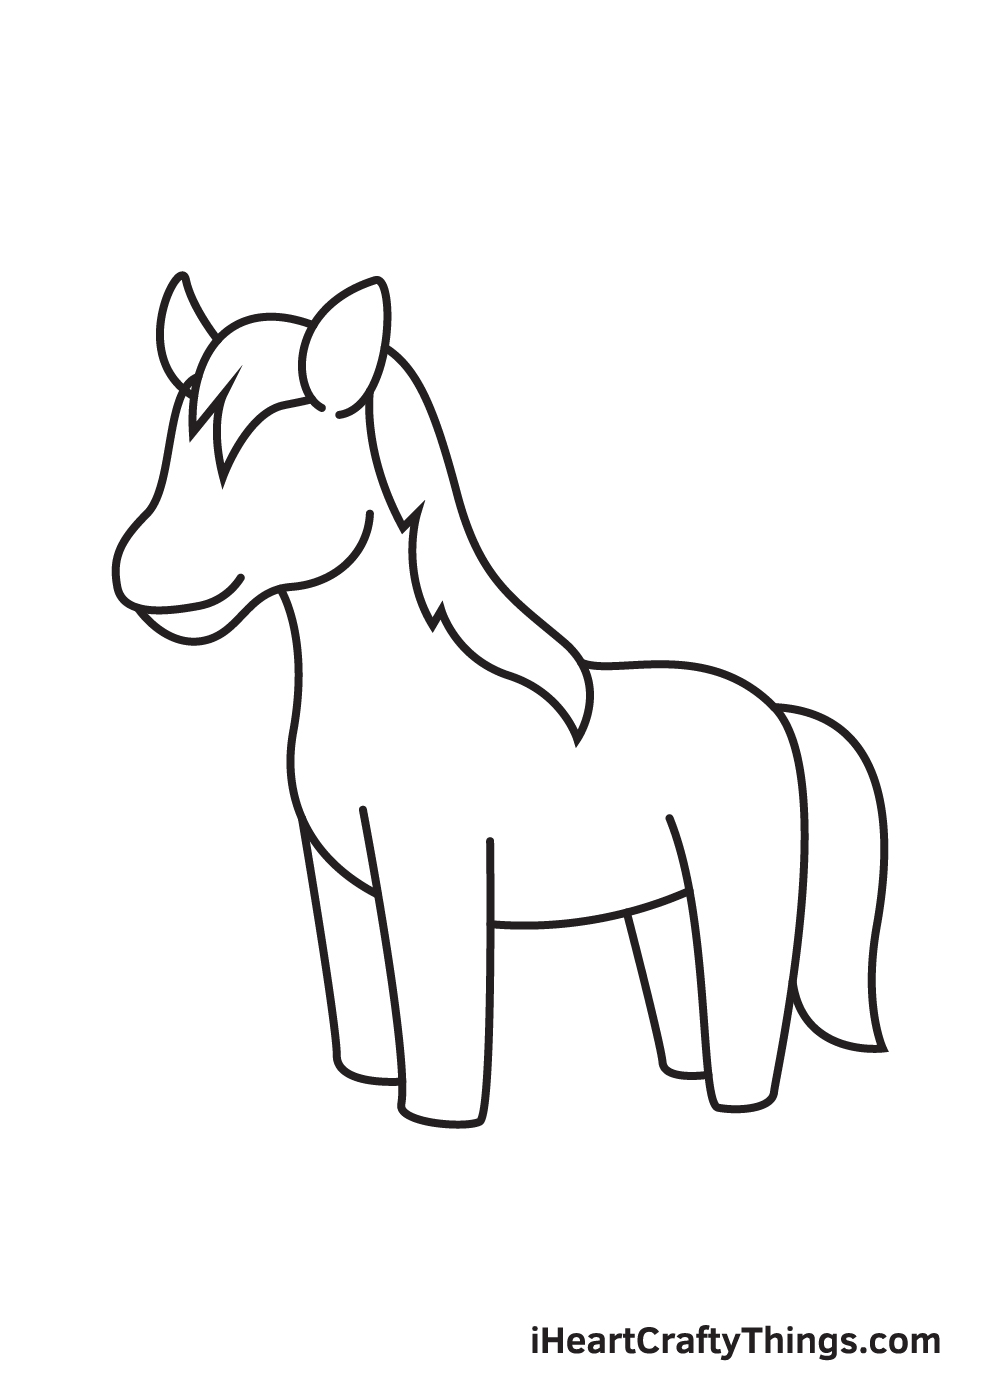 horse drawing - step 7